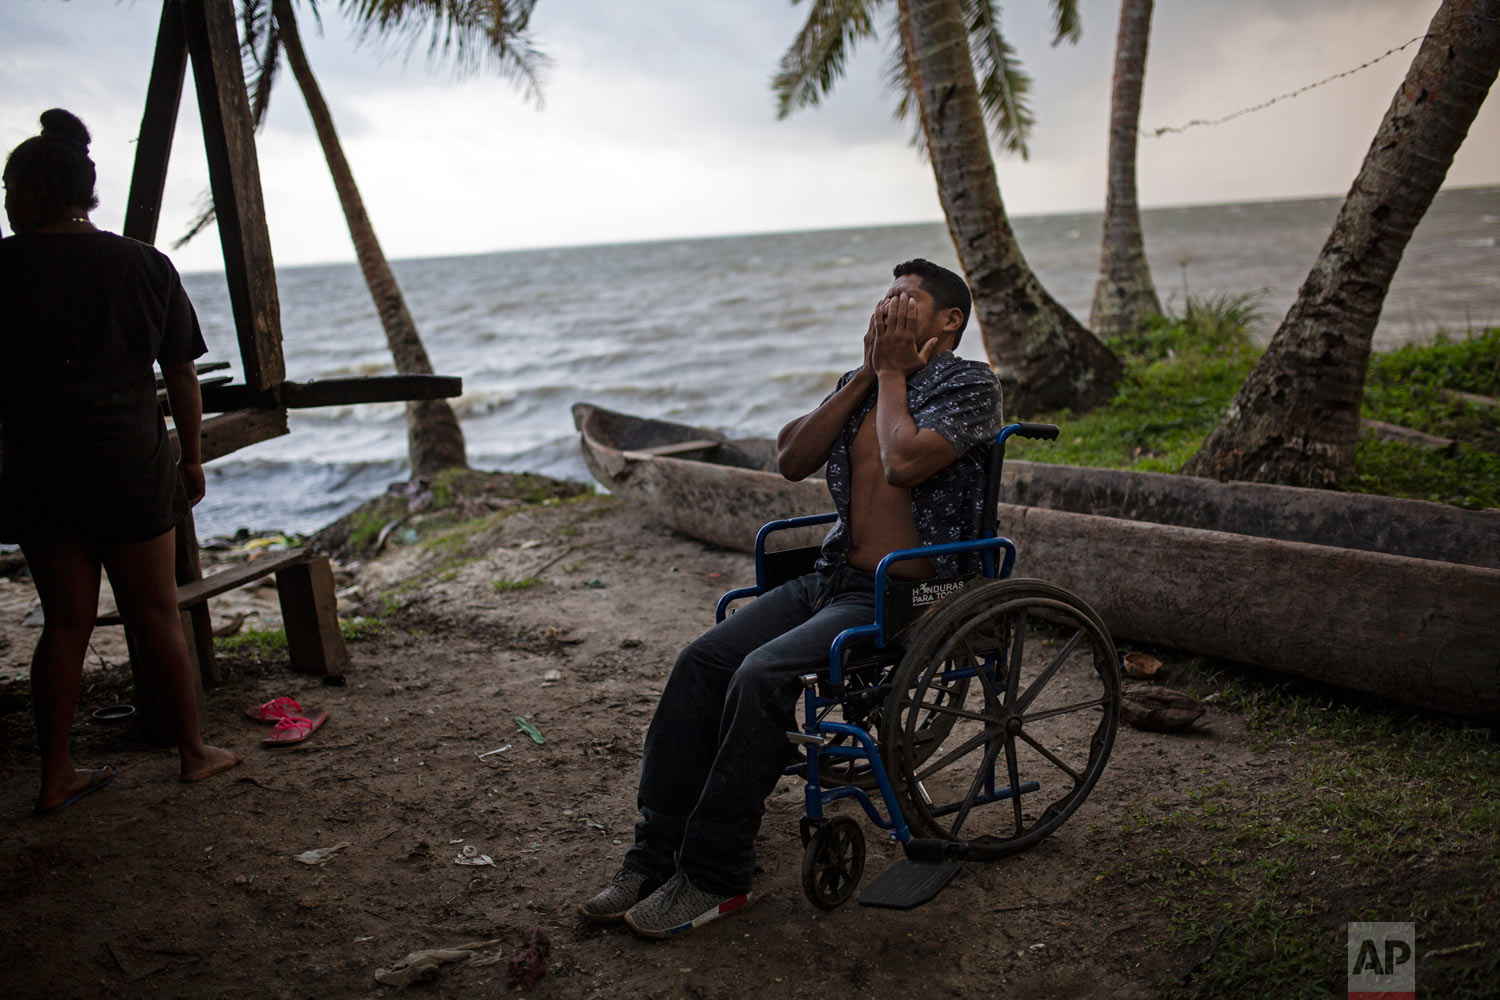  In this Jan 31, 2018 photo, 28-year-old lobster diver Charly Melendez puts his hands over his face in frustration as he comes to terms with having to rely on a wheelchair to get around, in Puerto Lempira, Honduras. (AP Photo/Rodrigo Abd) 